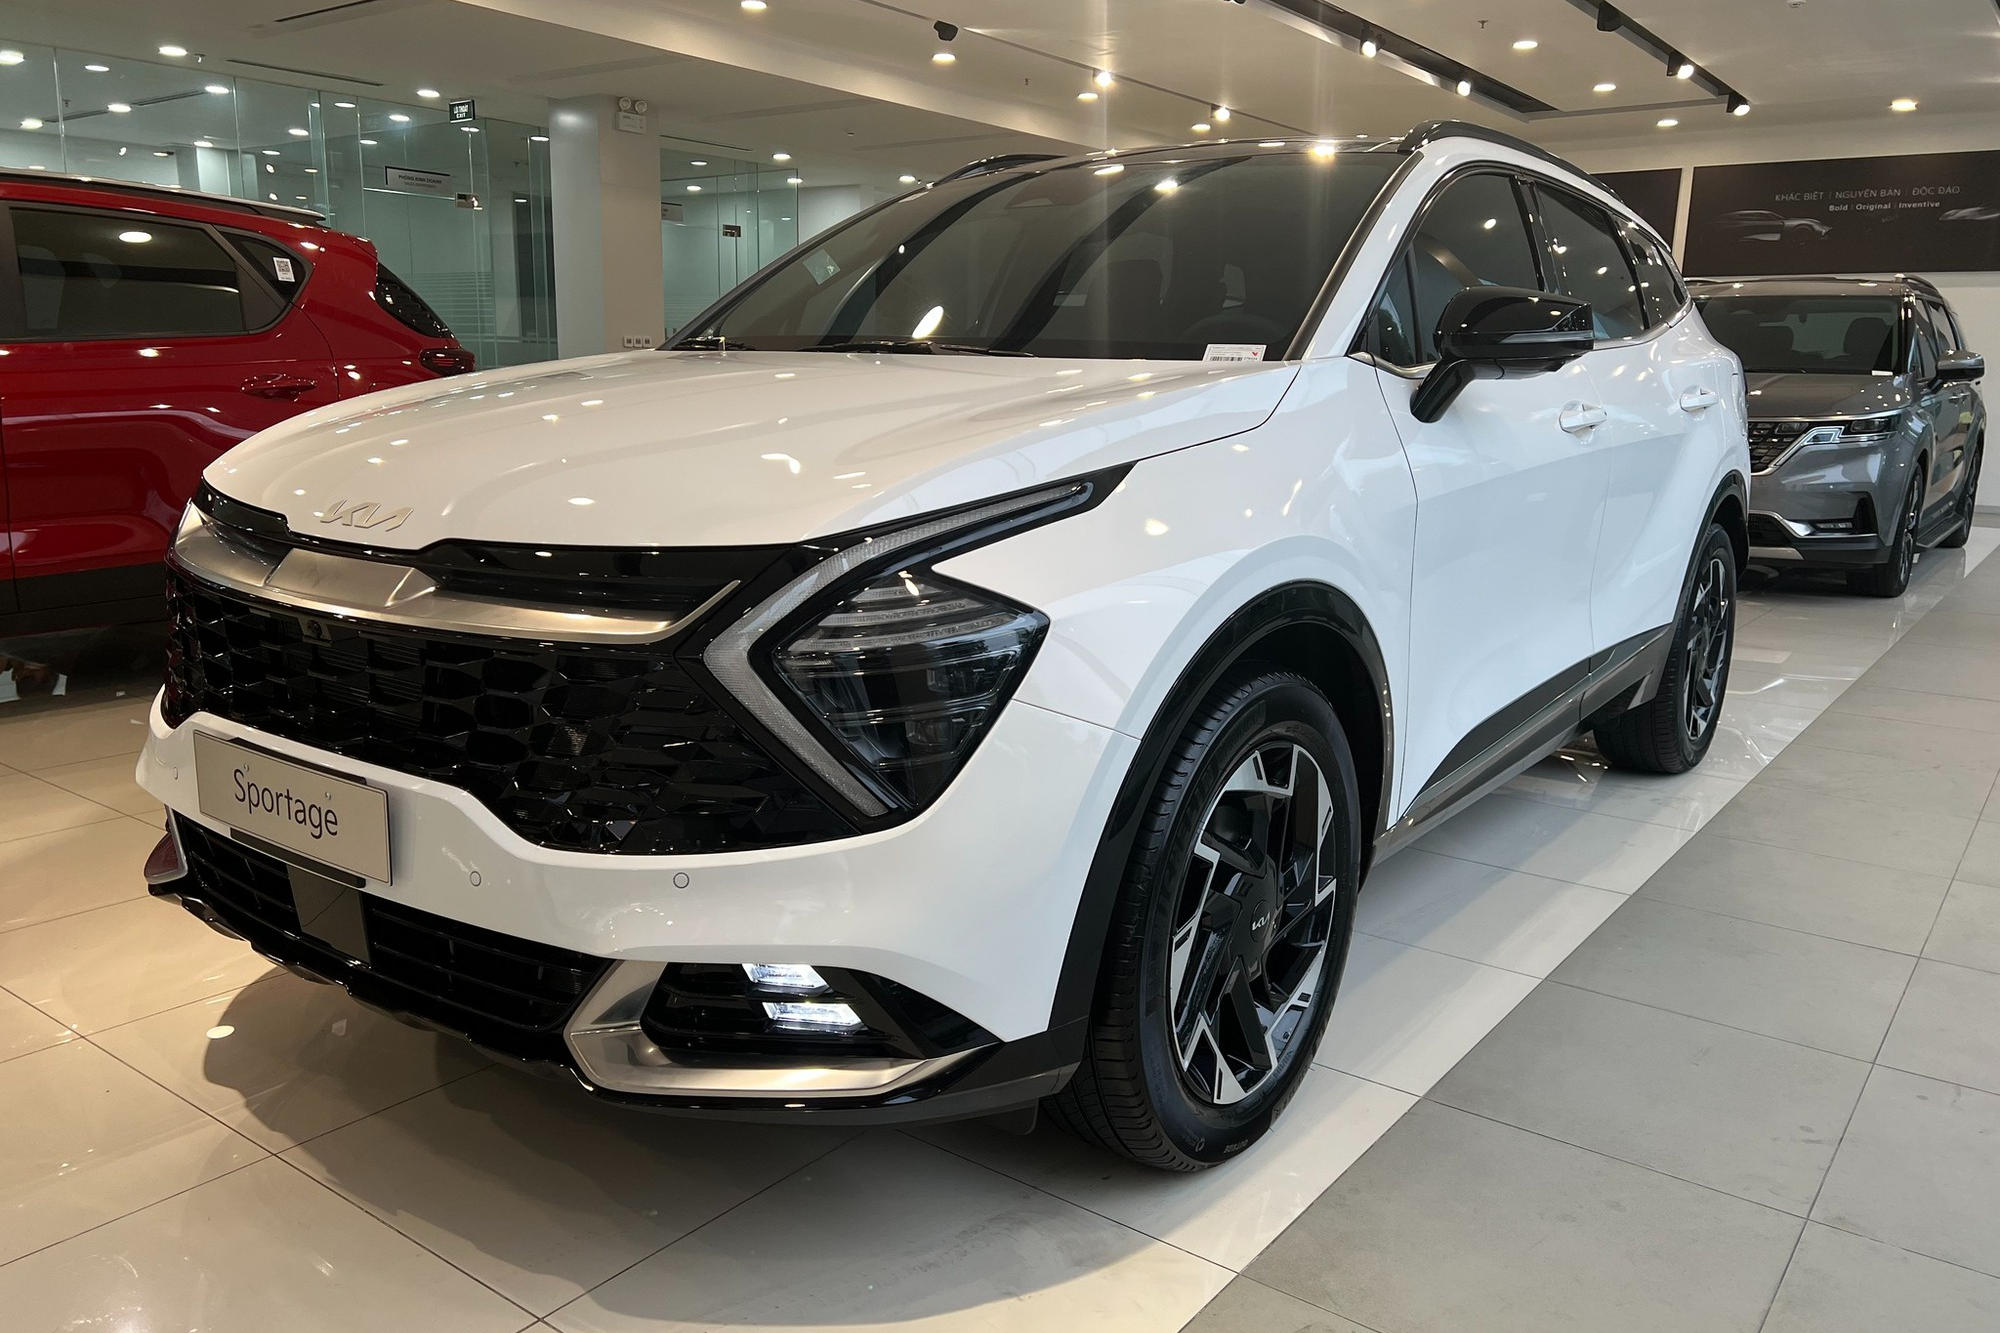 The standard version is only 799 million VND after being lowered, which is lower than the Hyundai Tucson (from 845 million VND) or Ford Territory (from 822 million VND) - Photo: Kia Dealer/Facebook